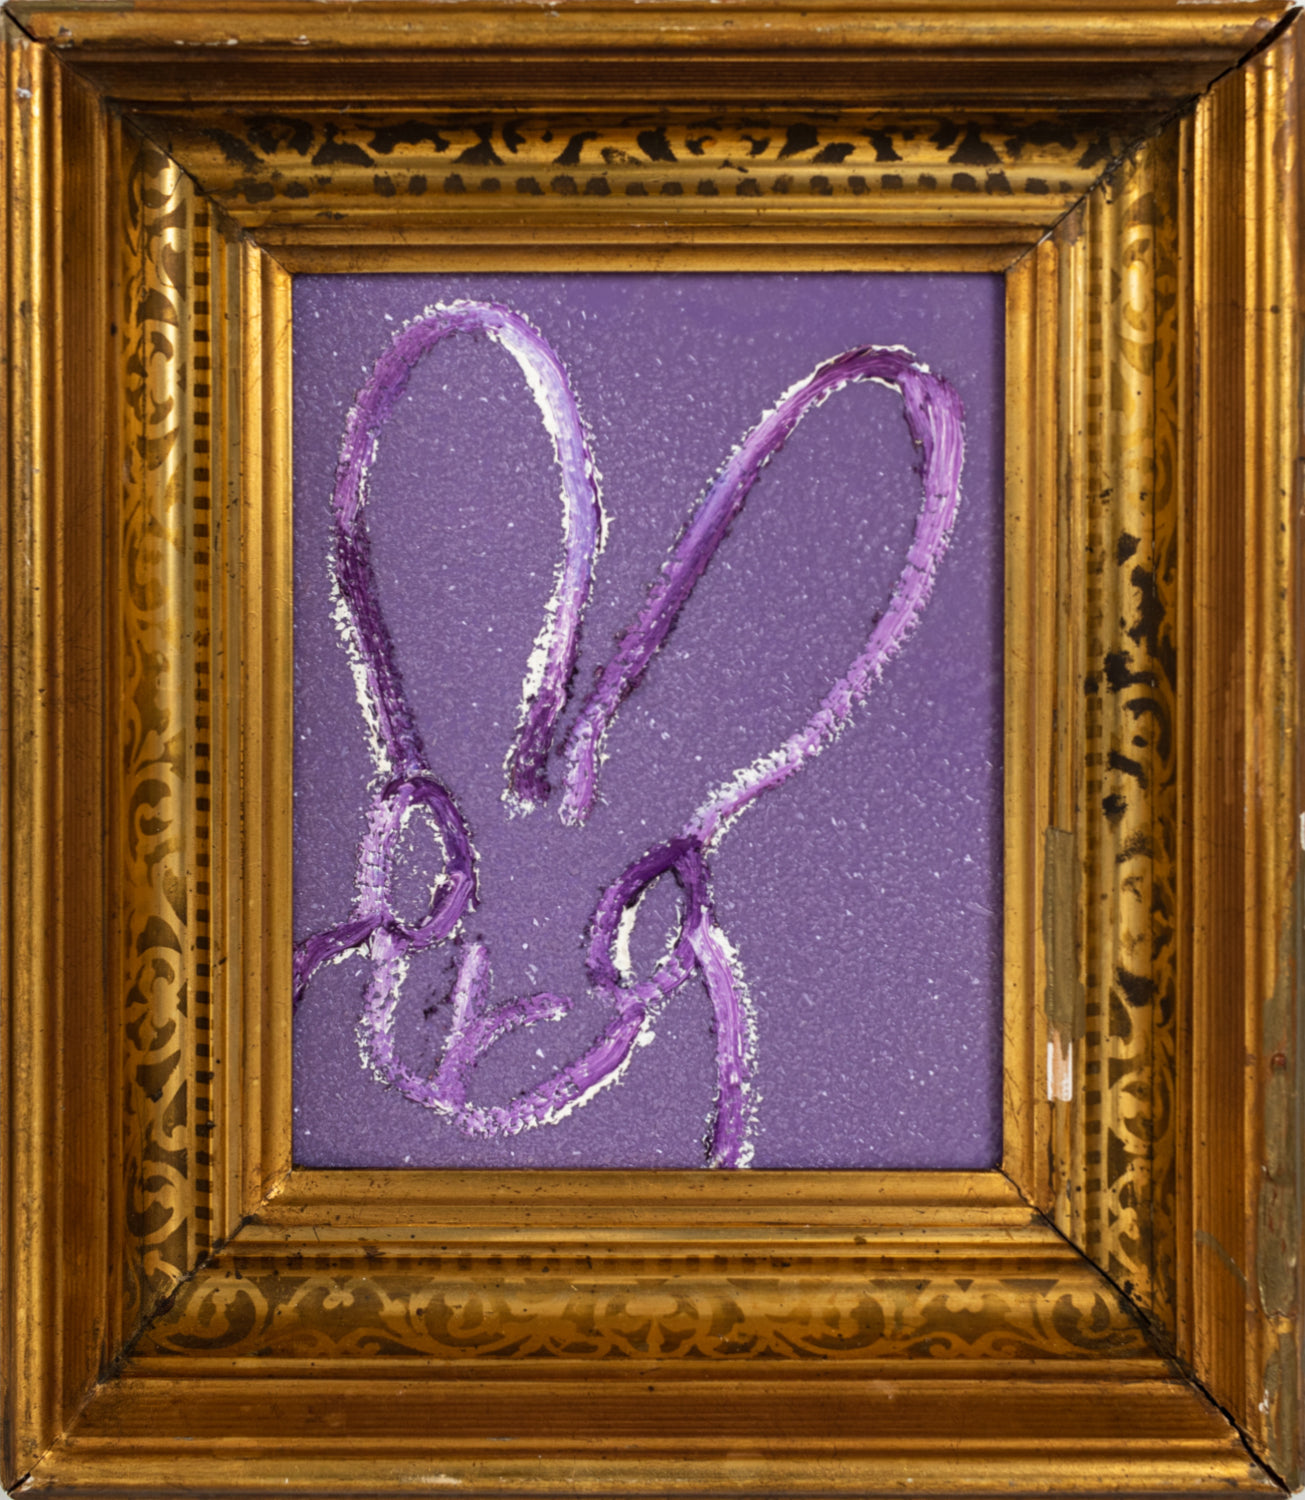 Purple Hunt Slonem bunny painting “Sparkle,”2021, Oil, Diamond dust and Resin on wood, 10 x 8 inches, in antique frame, Hunt Slonem Bunnies for sale at Manolis Projects Gallery